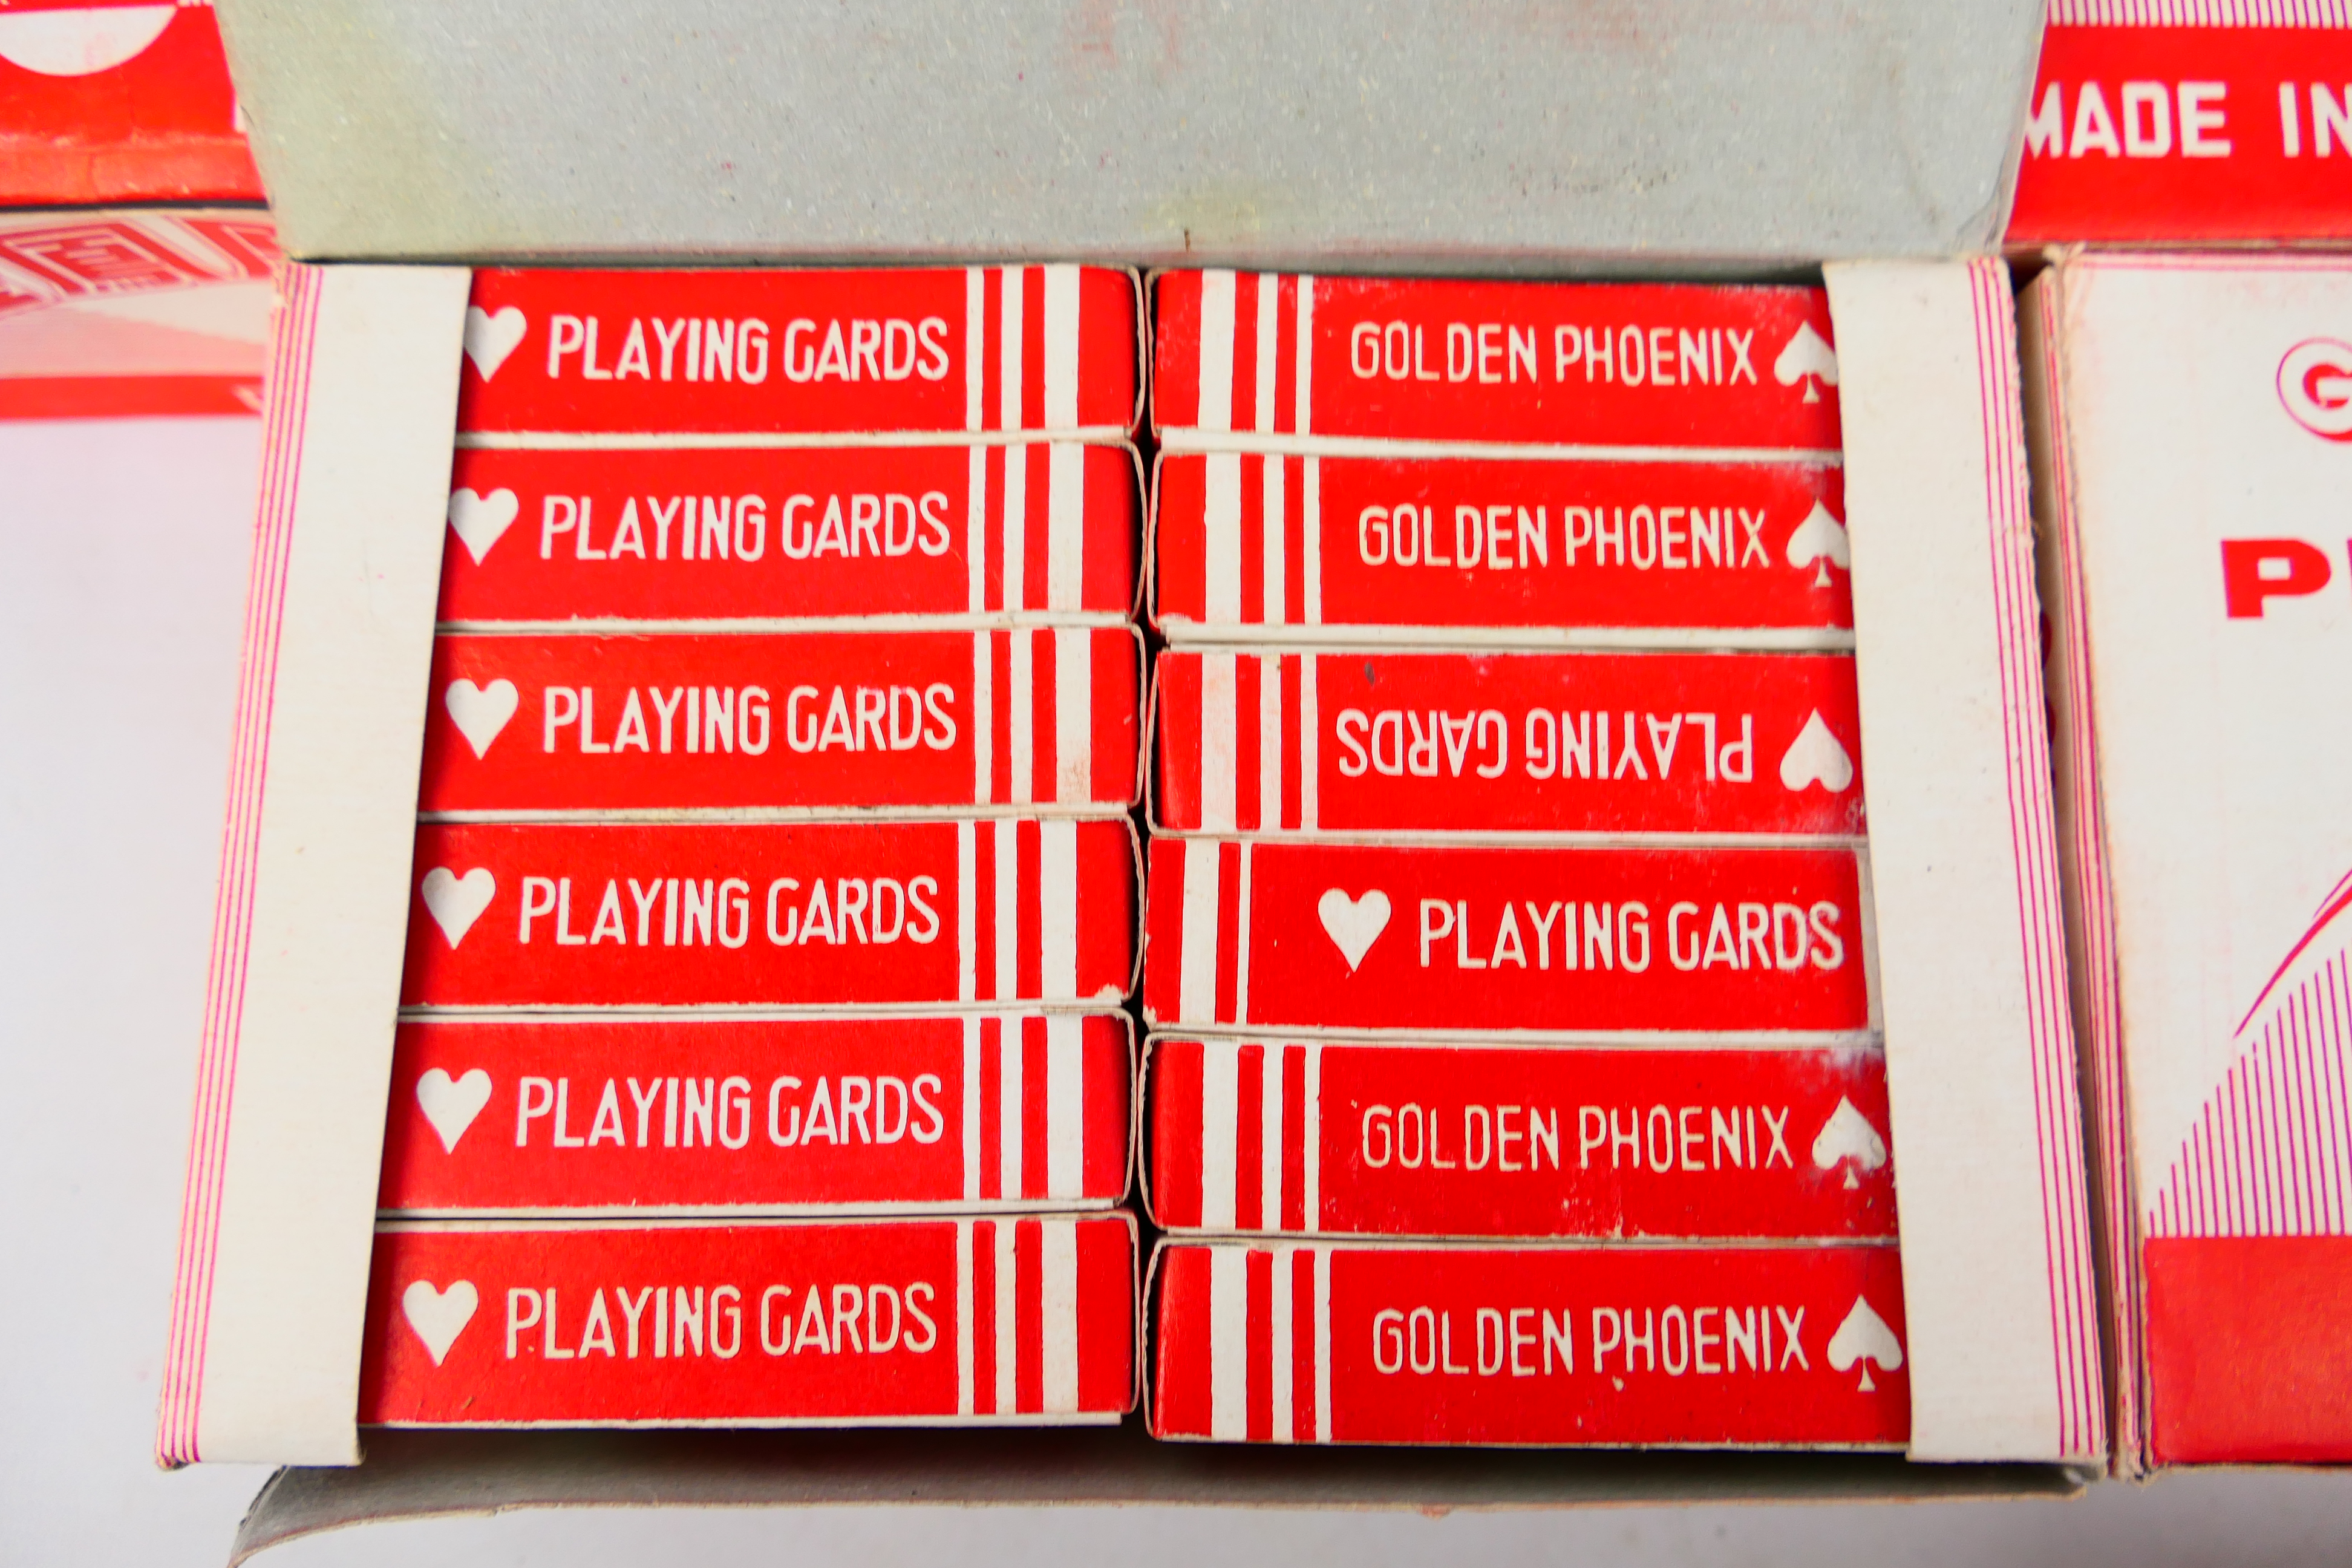 Golden Phoenix - Playing Cards - Unsold Shop Stock - A bulk load of 11 boxes of Golden Phoenix - Image 2 of 3